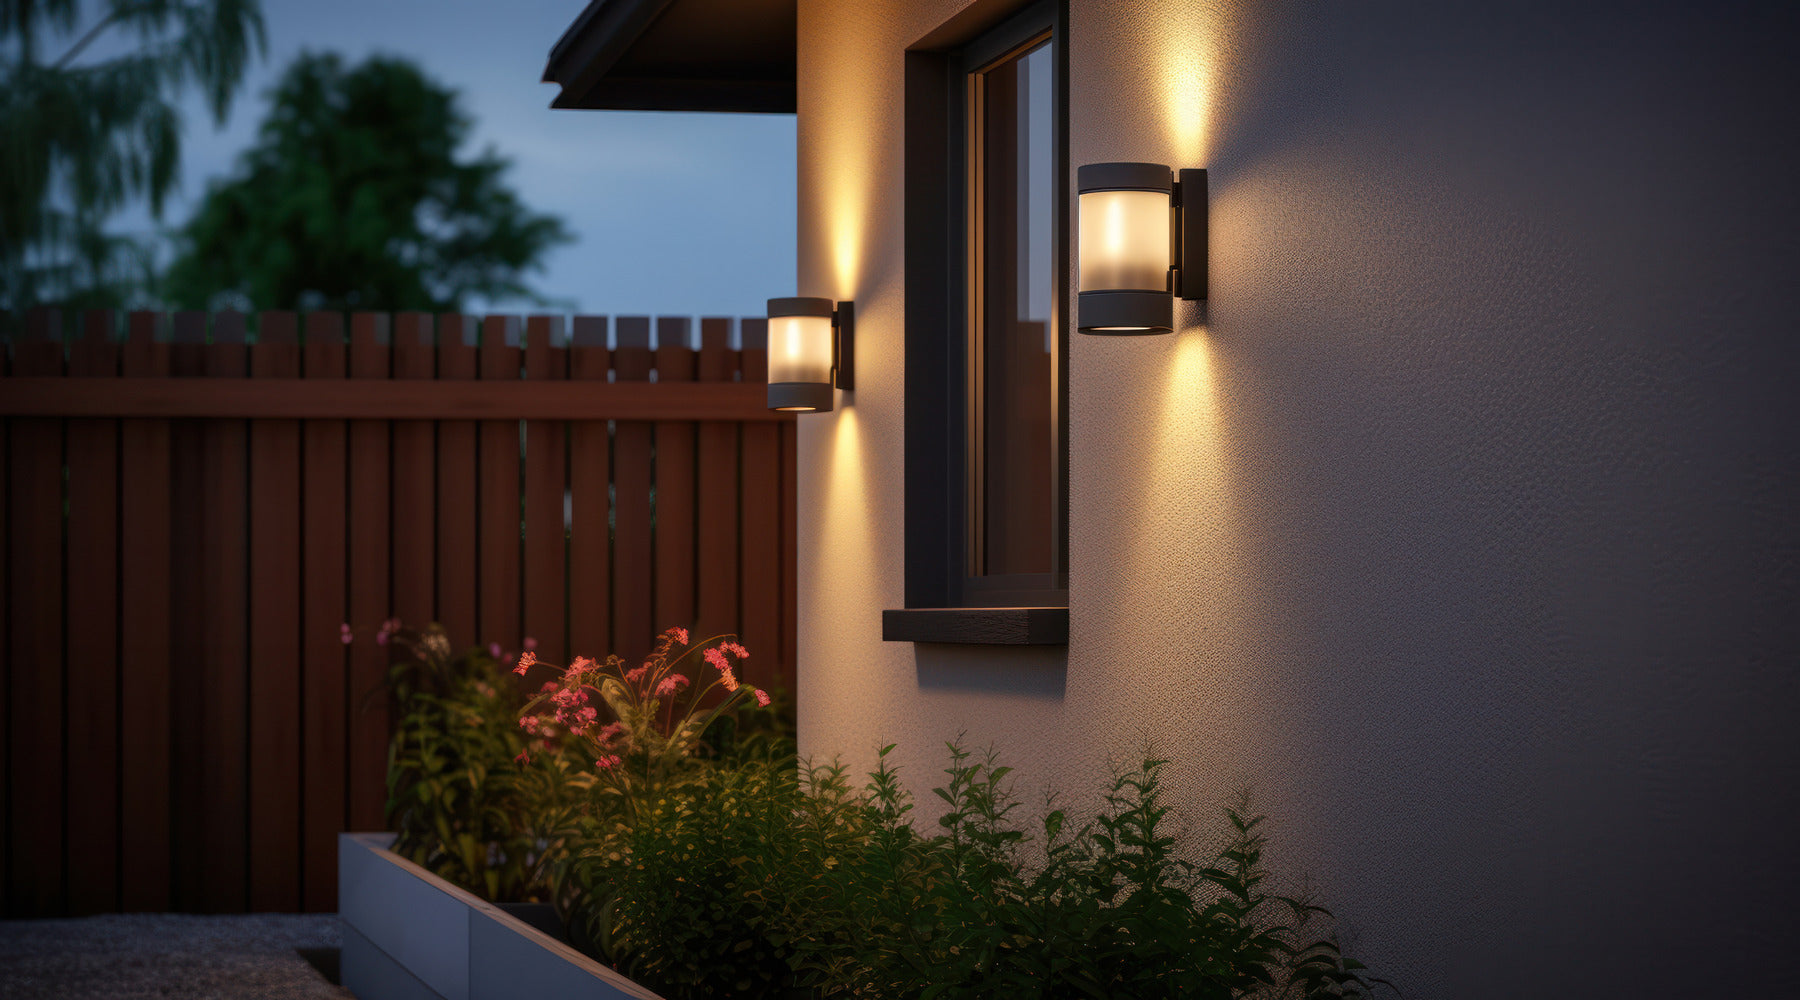 Close up view of LED outdoor wall lights next to window